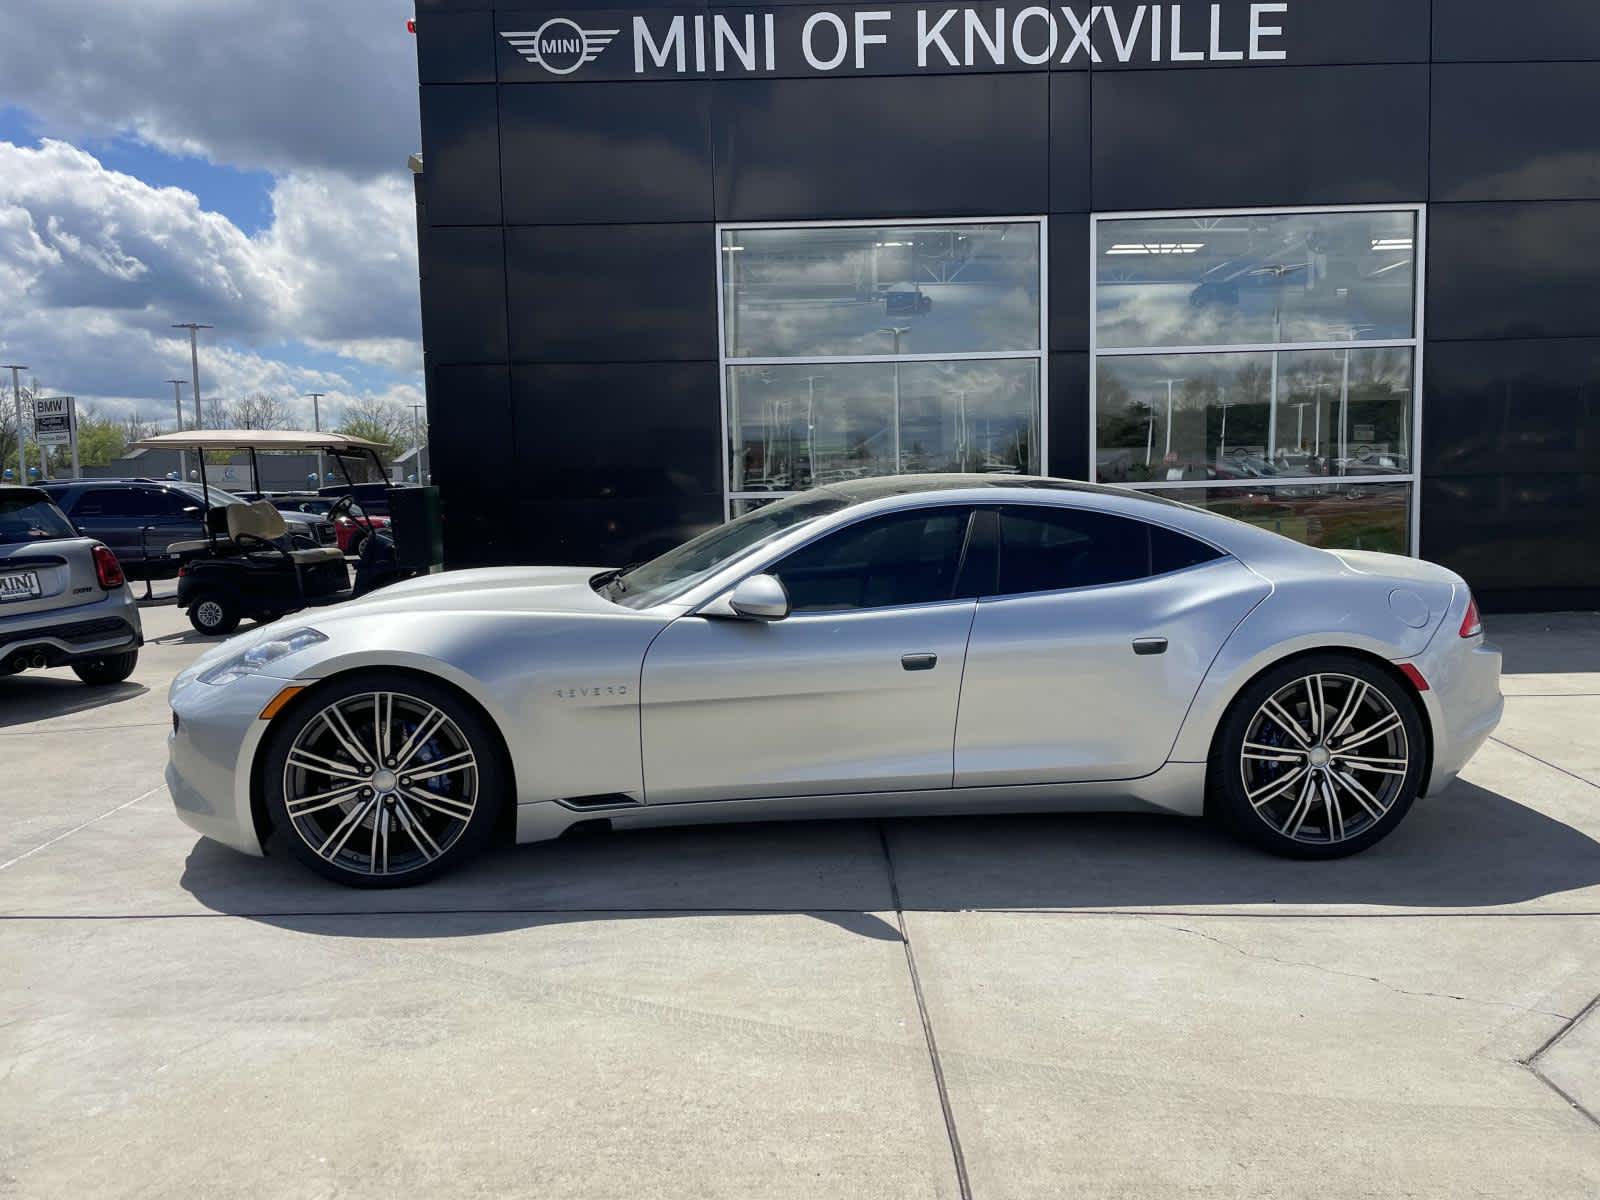 Used 2019 KARMA Revero  with VIN 50GK41SA1KA000047 for sale in Knoxville, TN